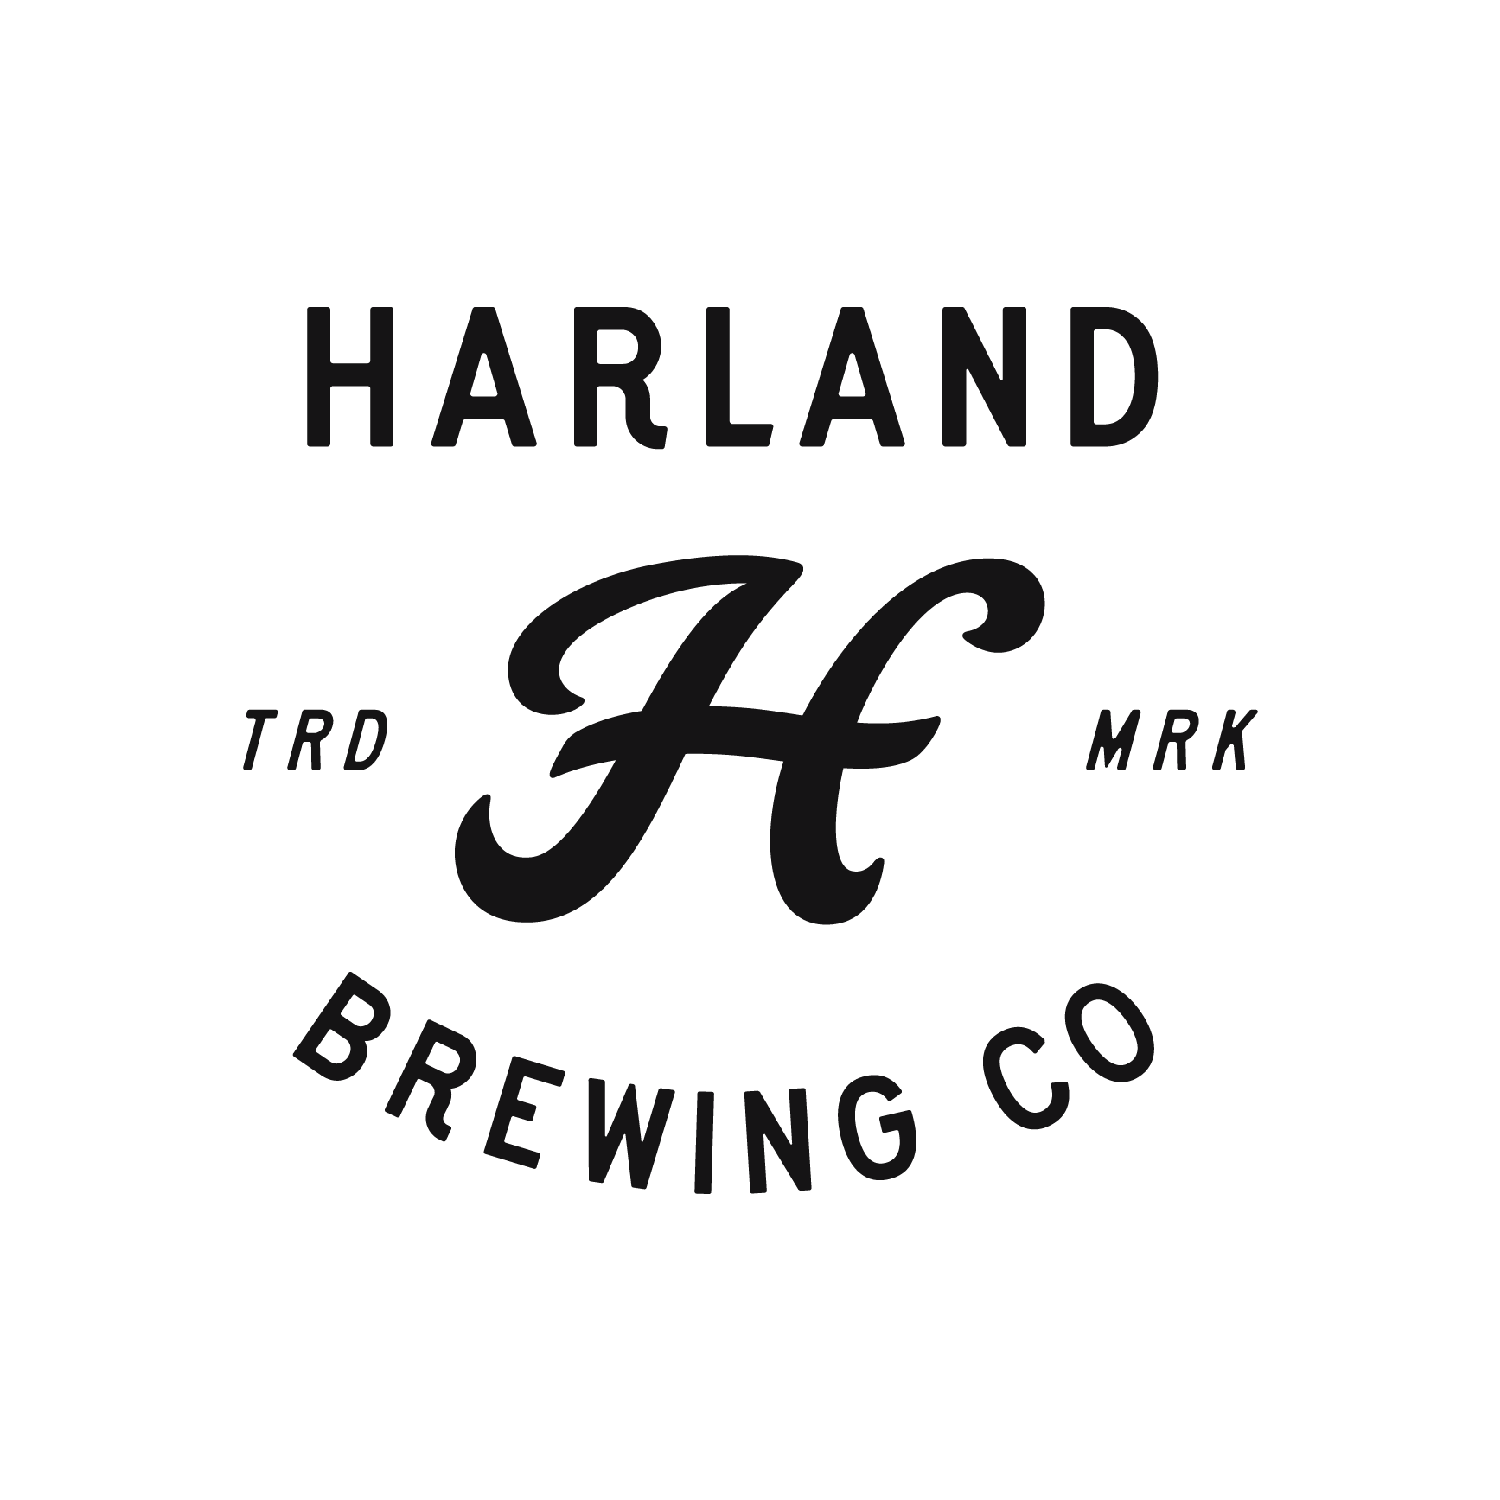 Harland Brewing Co